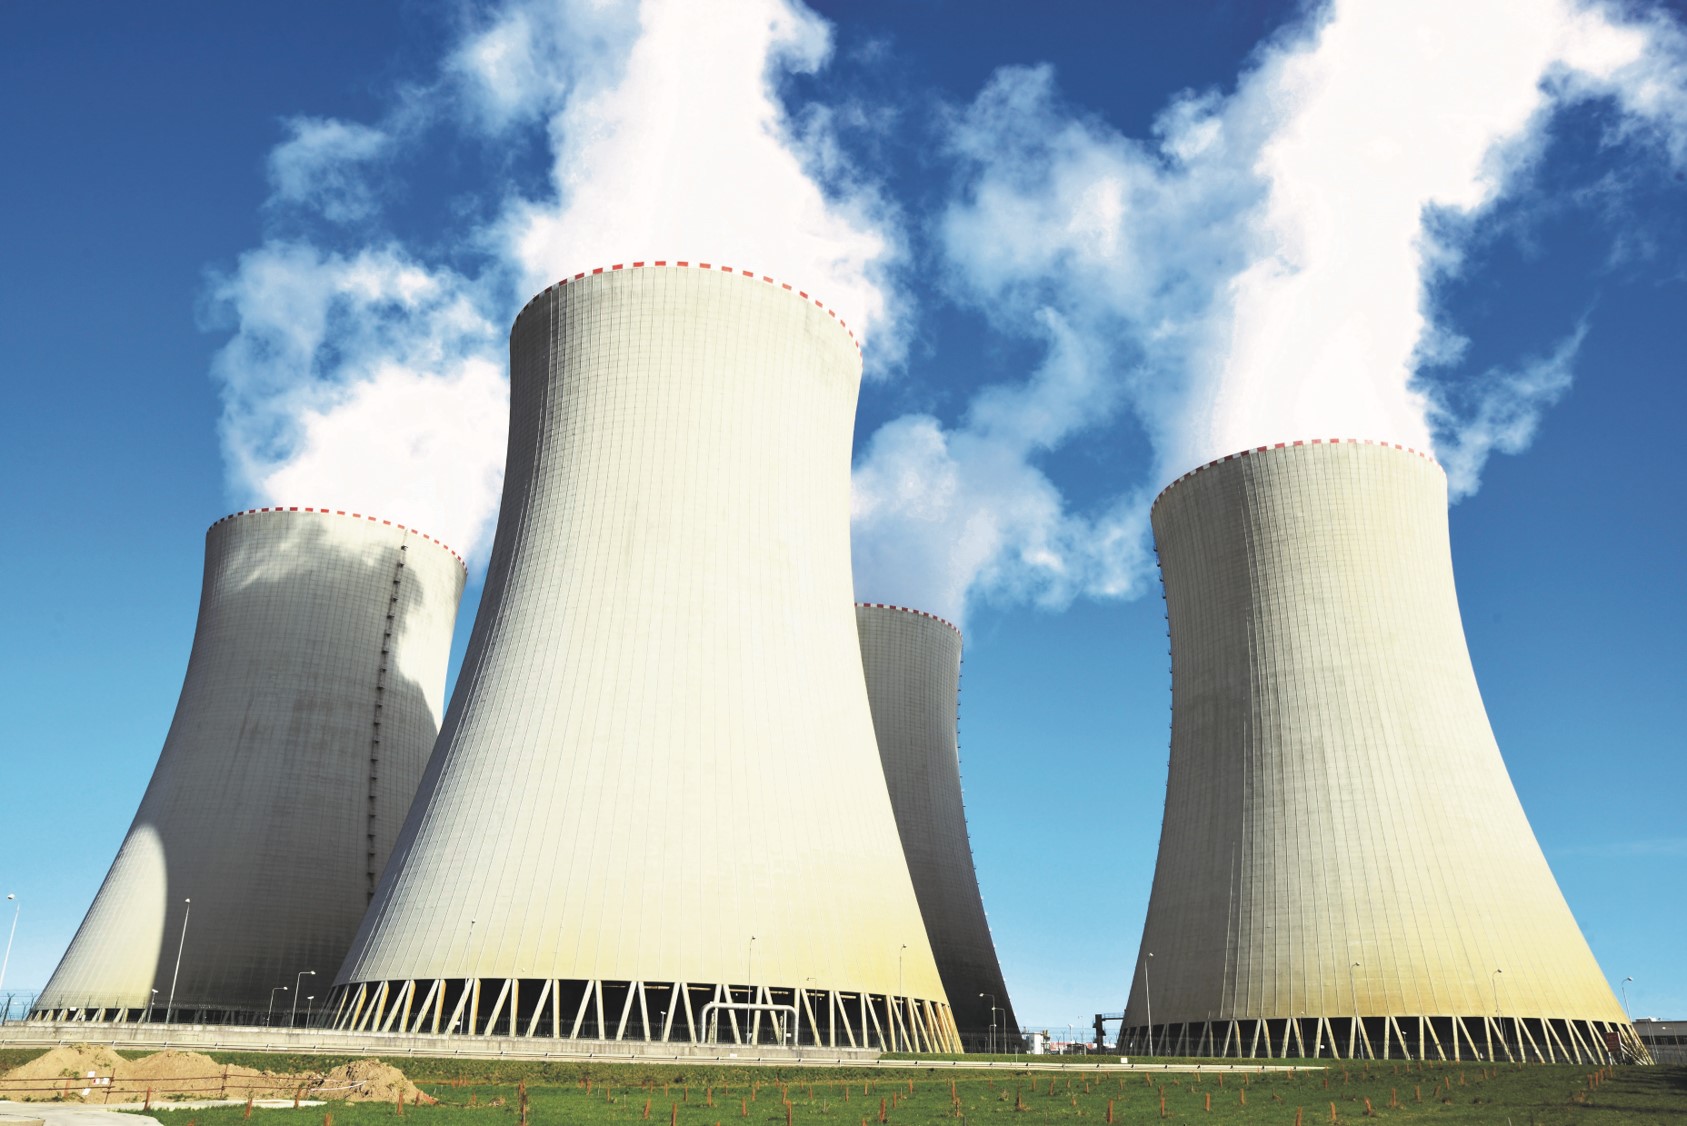 Test, Research, and Training Reactors Sustain Industry Progress